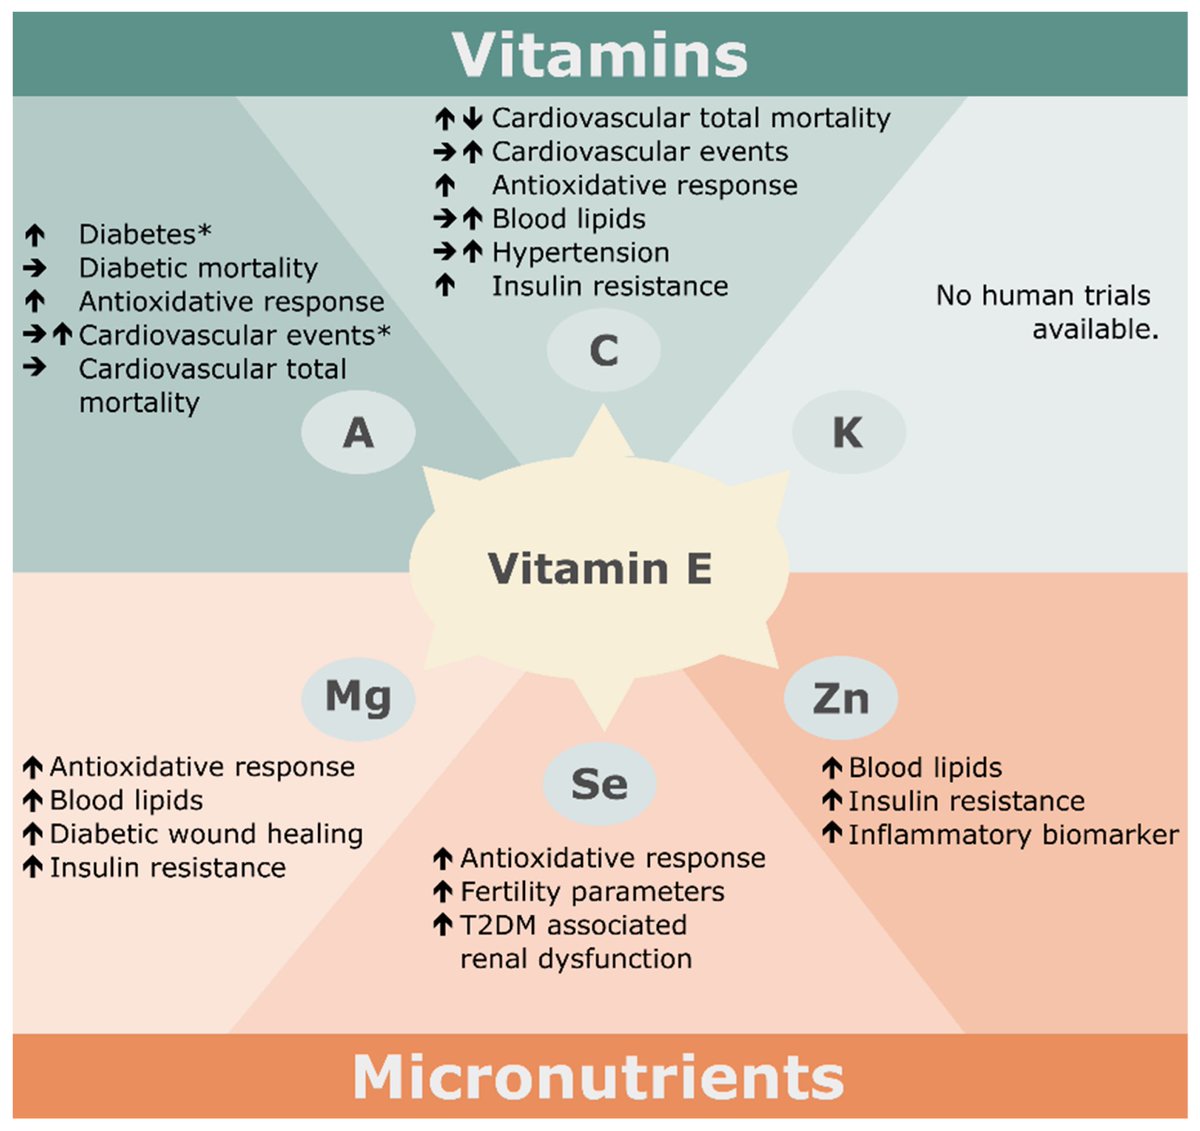 Impact of the #dietary intake or the #supplementation of #vitaminE and other #micronutrients including #vitaminsA (including β-carotene), C, and K, as well as #zinc, #magnesium, and #selenium, on metabolic diseases.

mdpi.com/2076-3921/11/9…